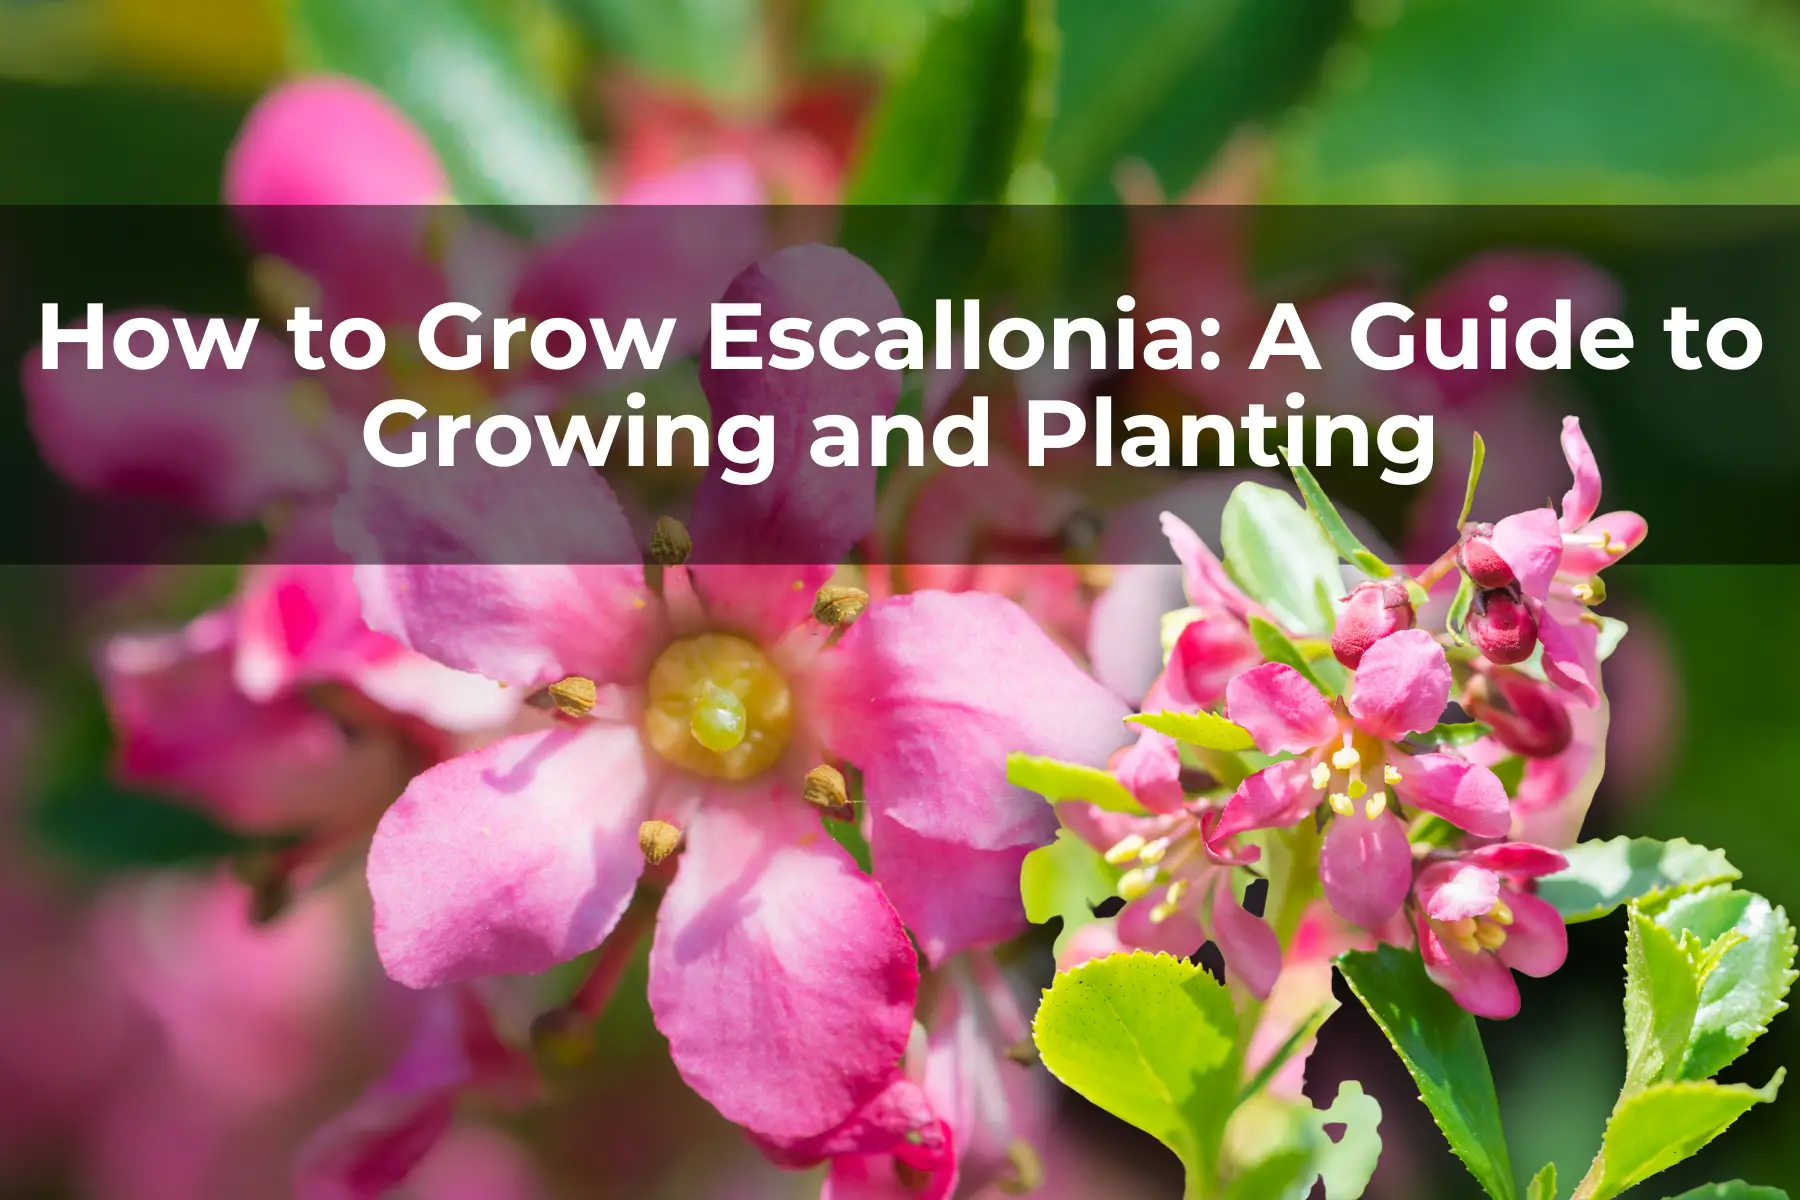 How to Grow Escallonia: A Guide to Growing and Planting